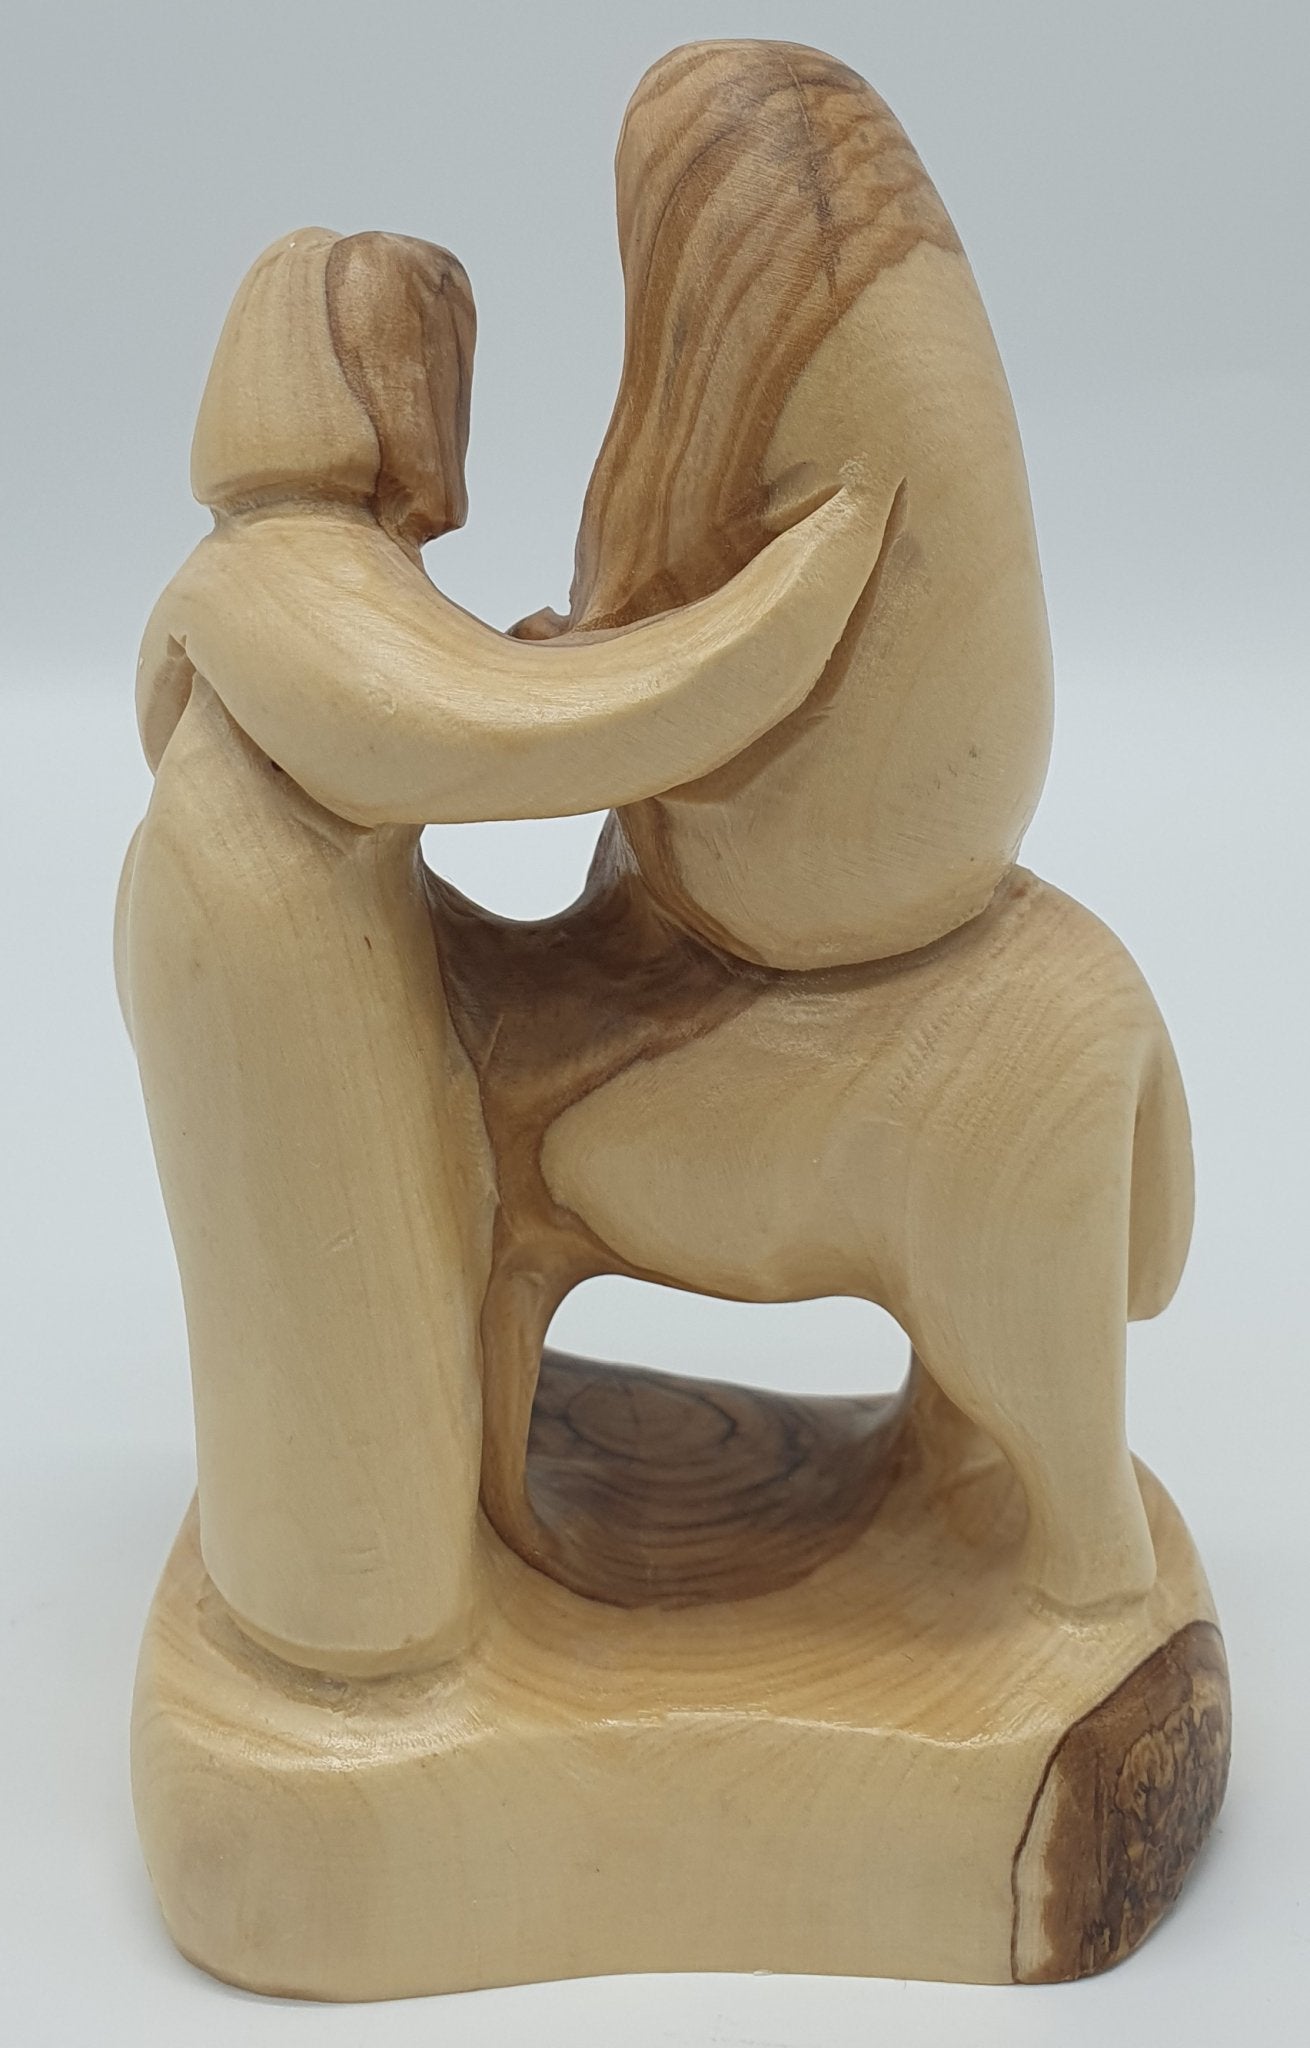 Olive Wood Nativity Statue - Flight to Egypt Scene, Jesus, Mary, and Joseph - Holy Land Crafted - Zuluf